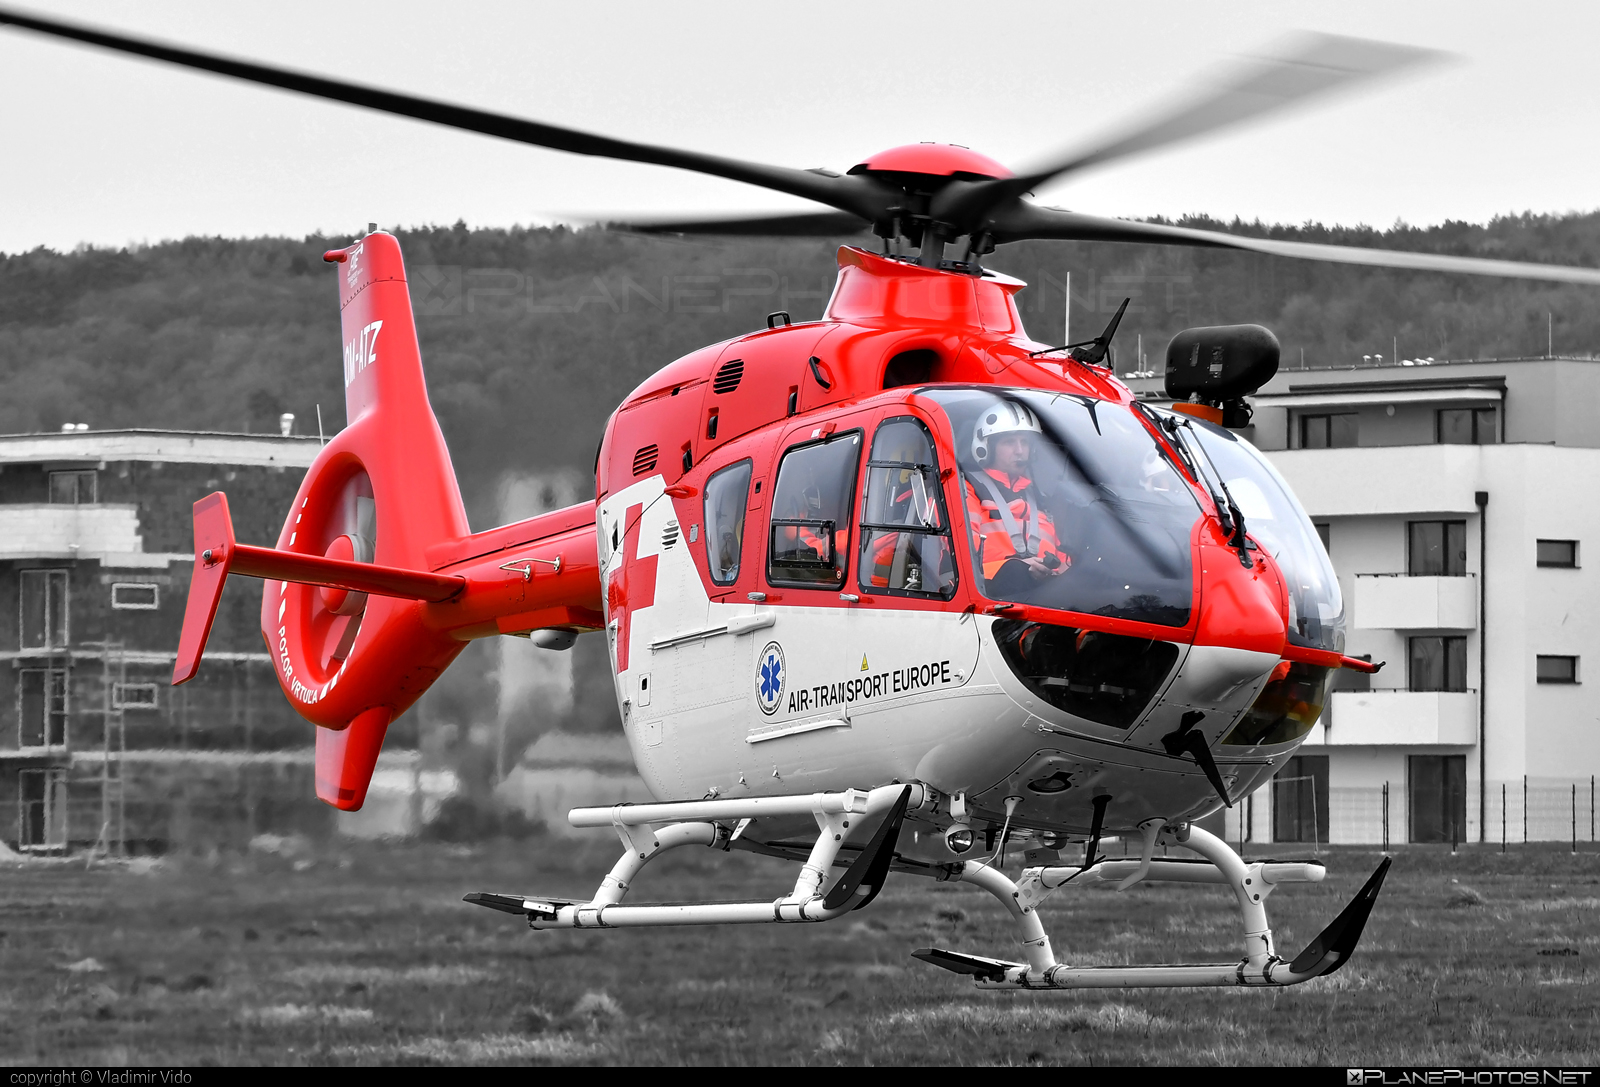 Eurocopter EC135 T2+ - OM-ATZ operated by Air Transport Europe #airtransporteurope #ec135 #ec135t2 #ec135t2plus #eurocopter